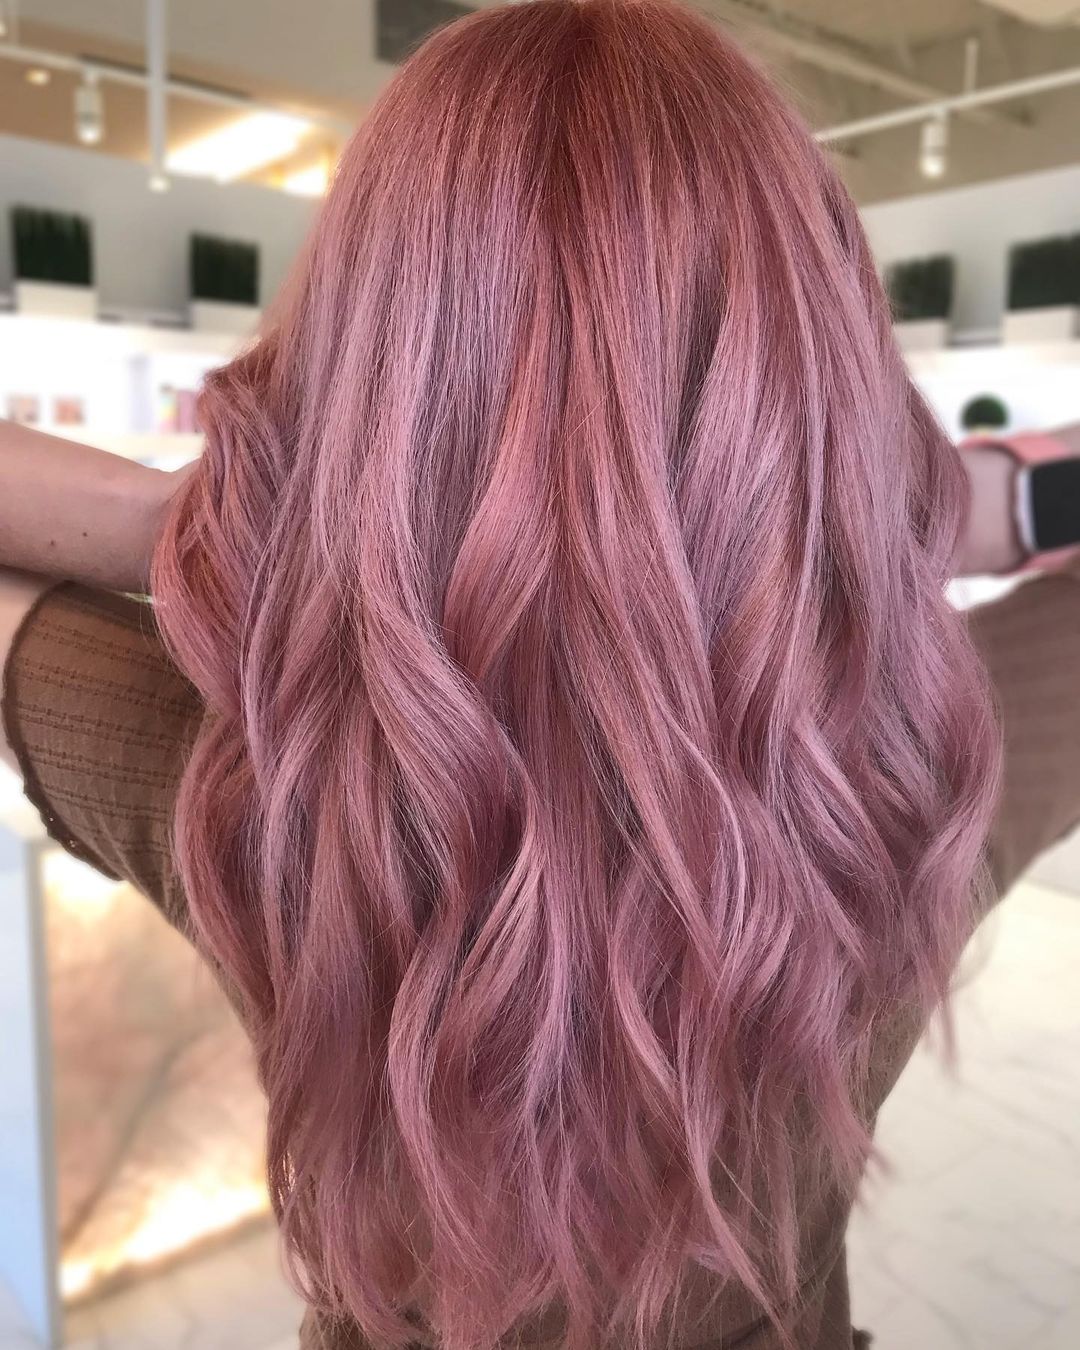  Waist-Length Rose Gold Hair with Pastel Pink Waves